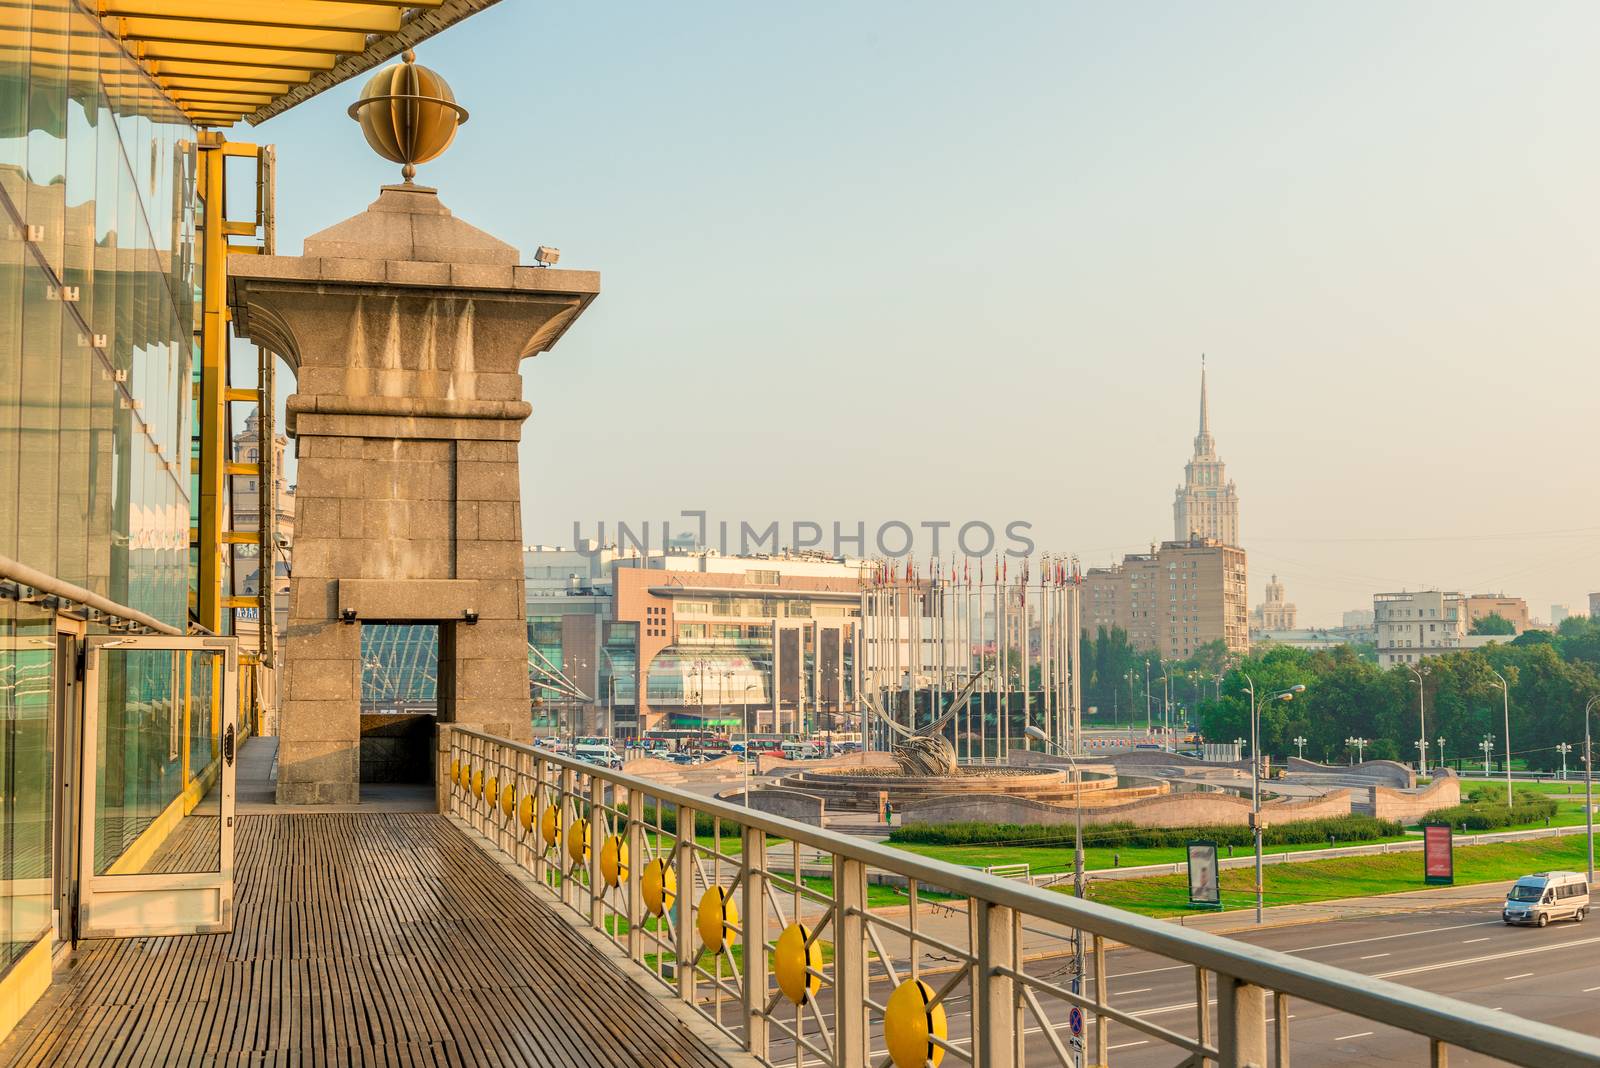 Pedestrian bridge over the highway at the Kazan station in Mosco by kosmsos111